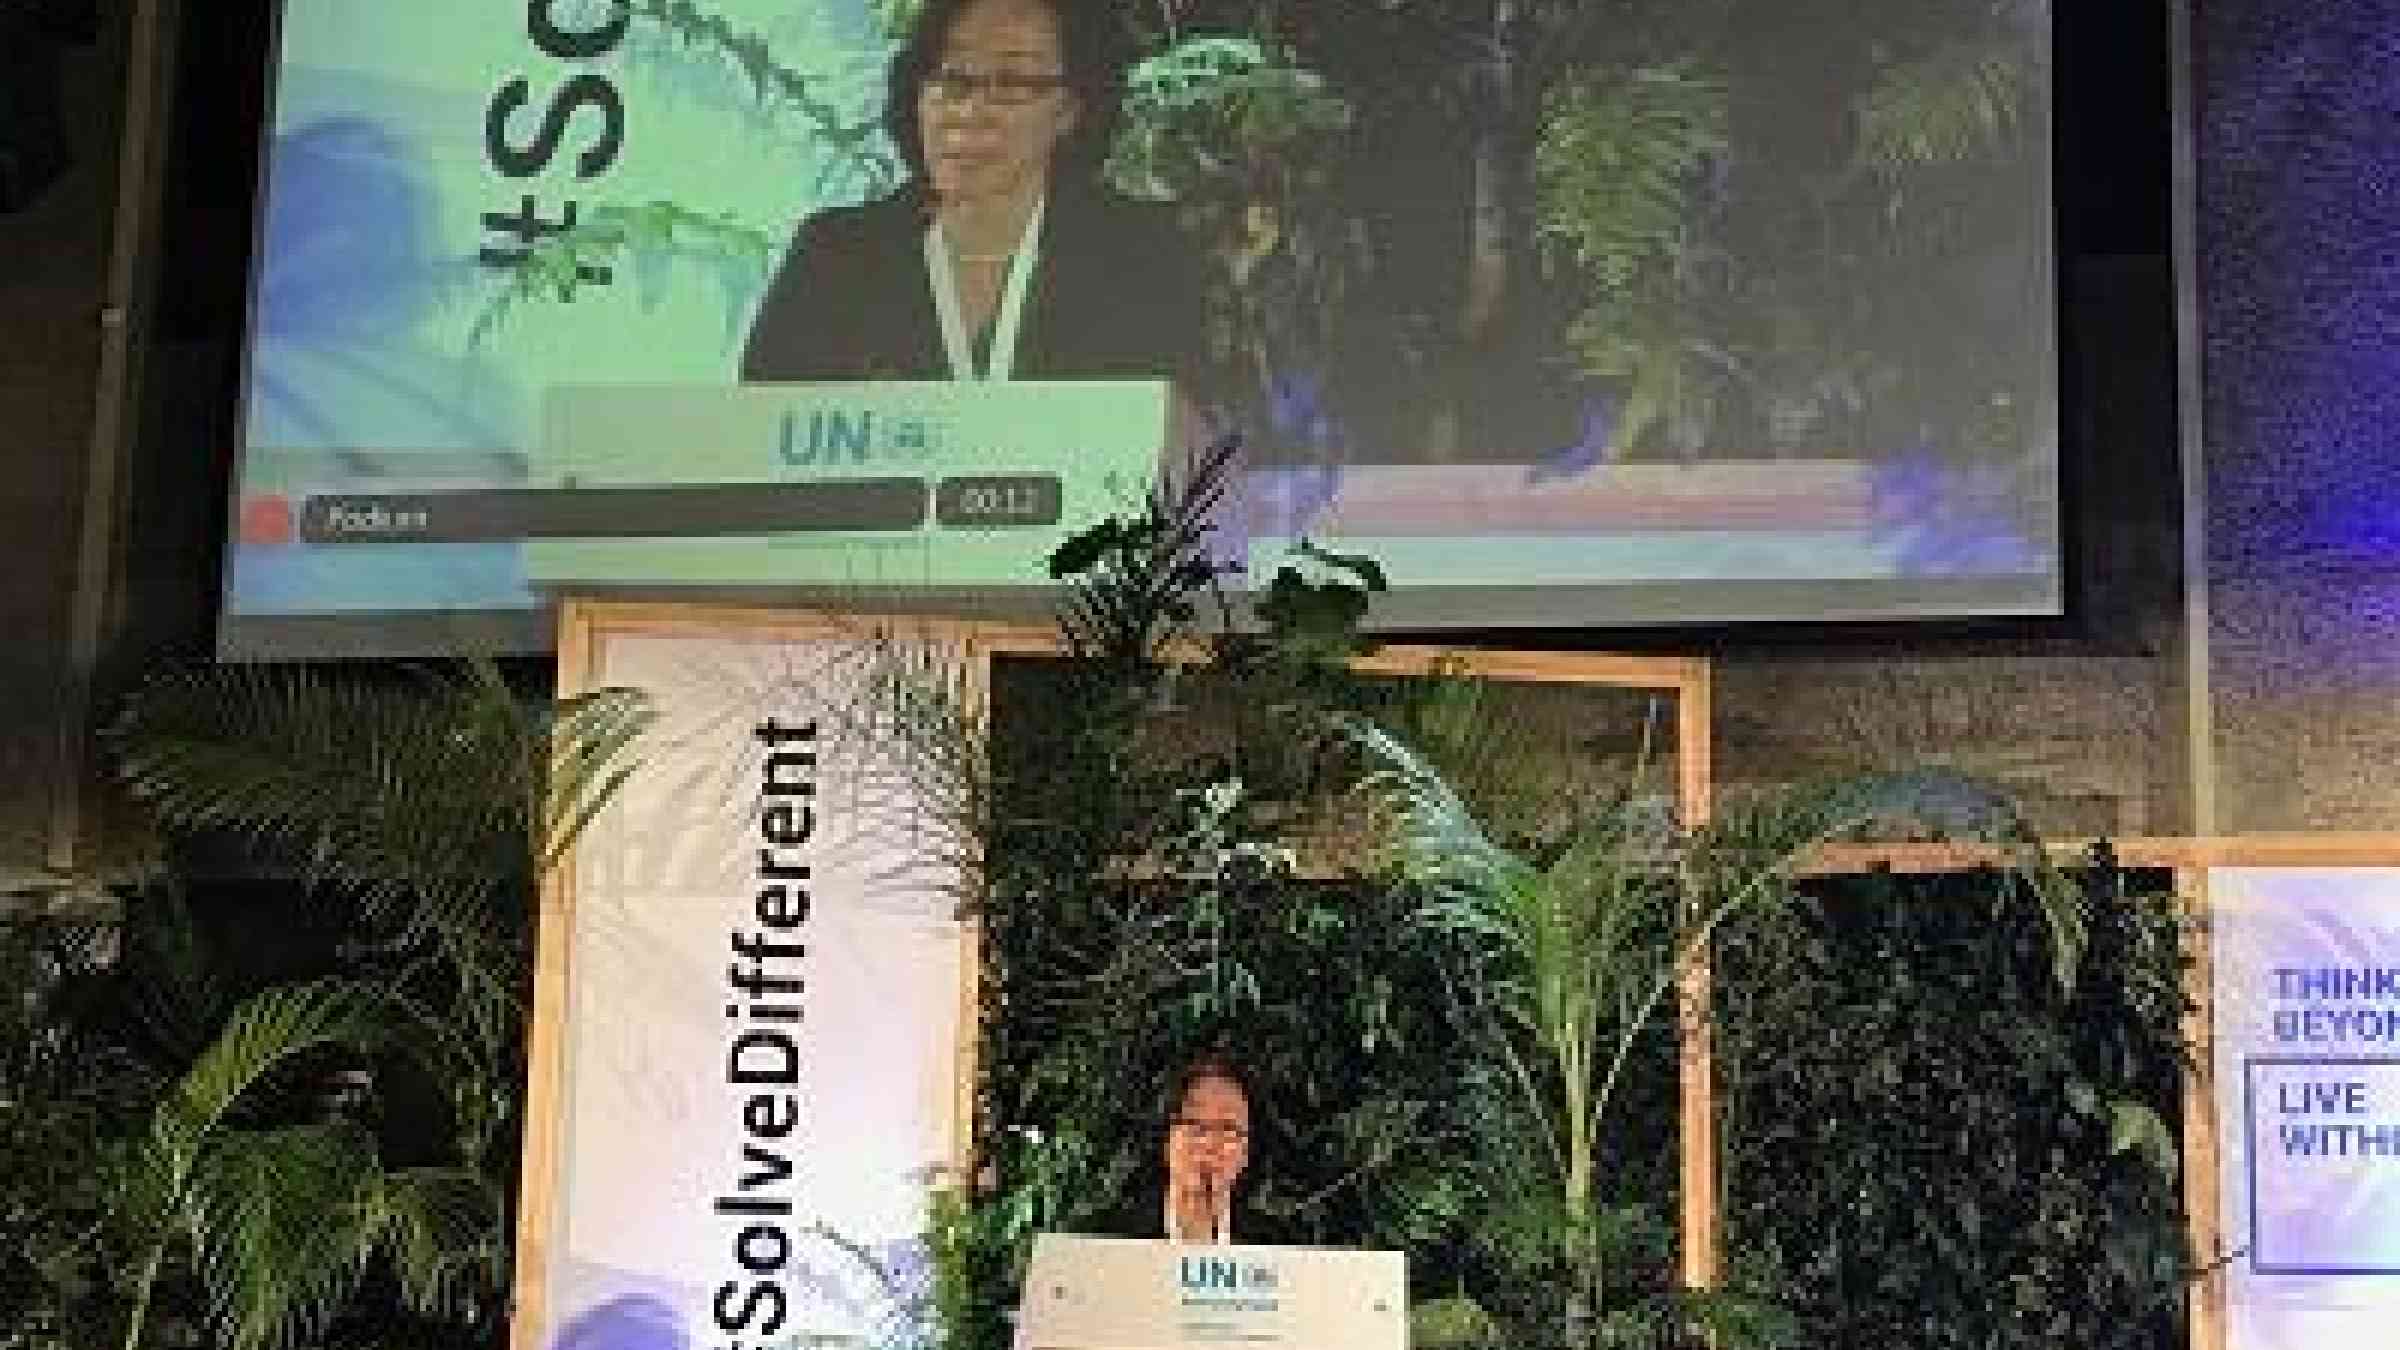 Mami Mitzutori delivering the official statement of the UN Office for Disaster Risk Reduction on the closing day of the UN Environment Assembly